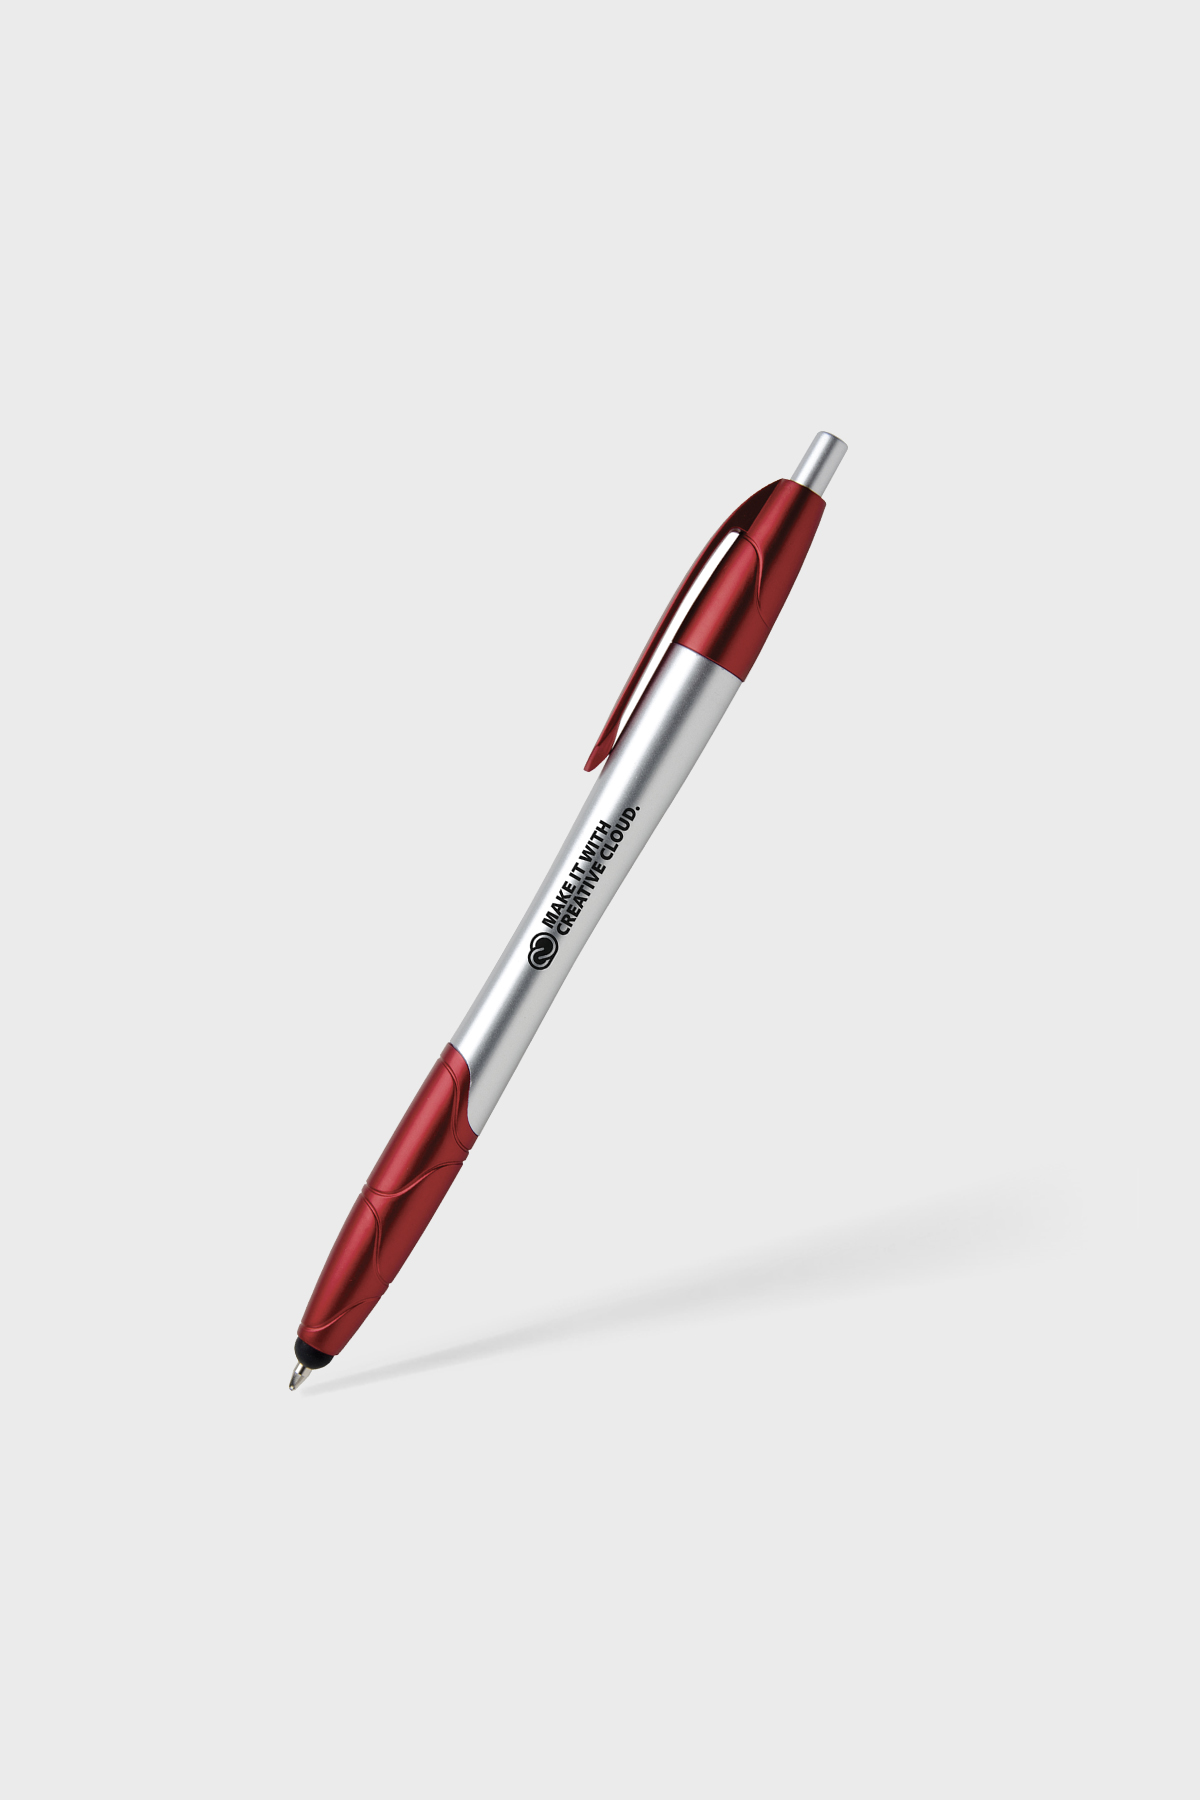 Look for Awesome Pen — HUB